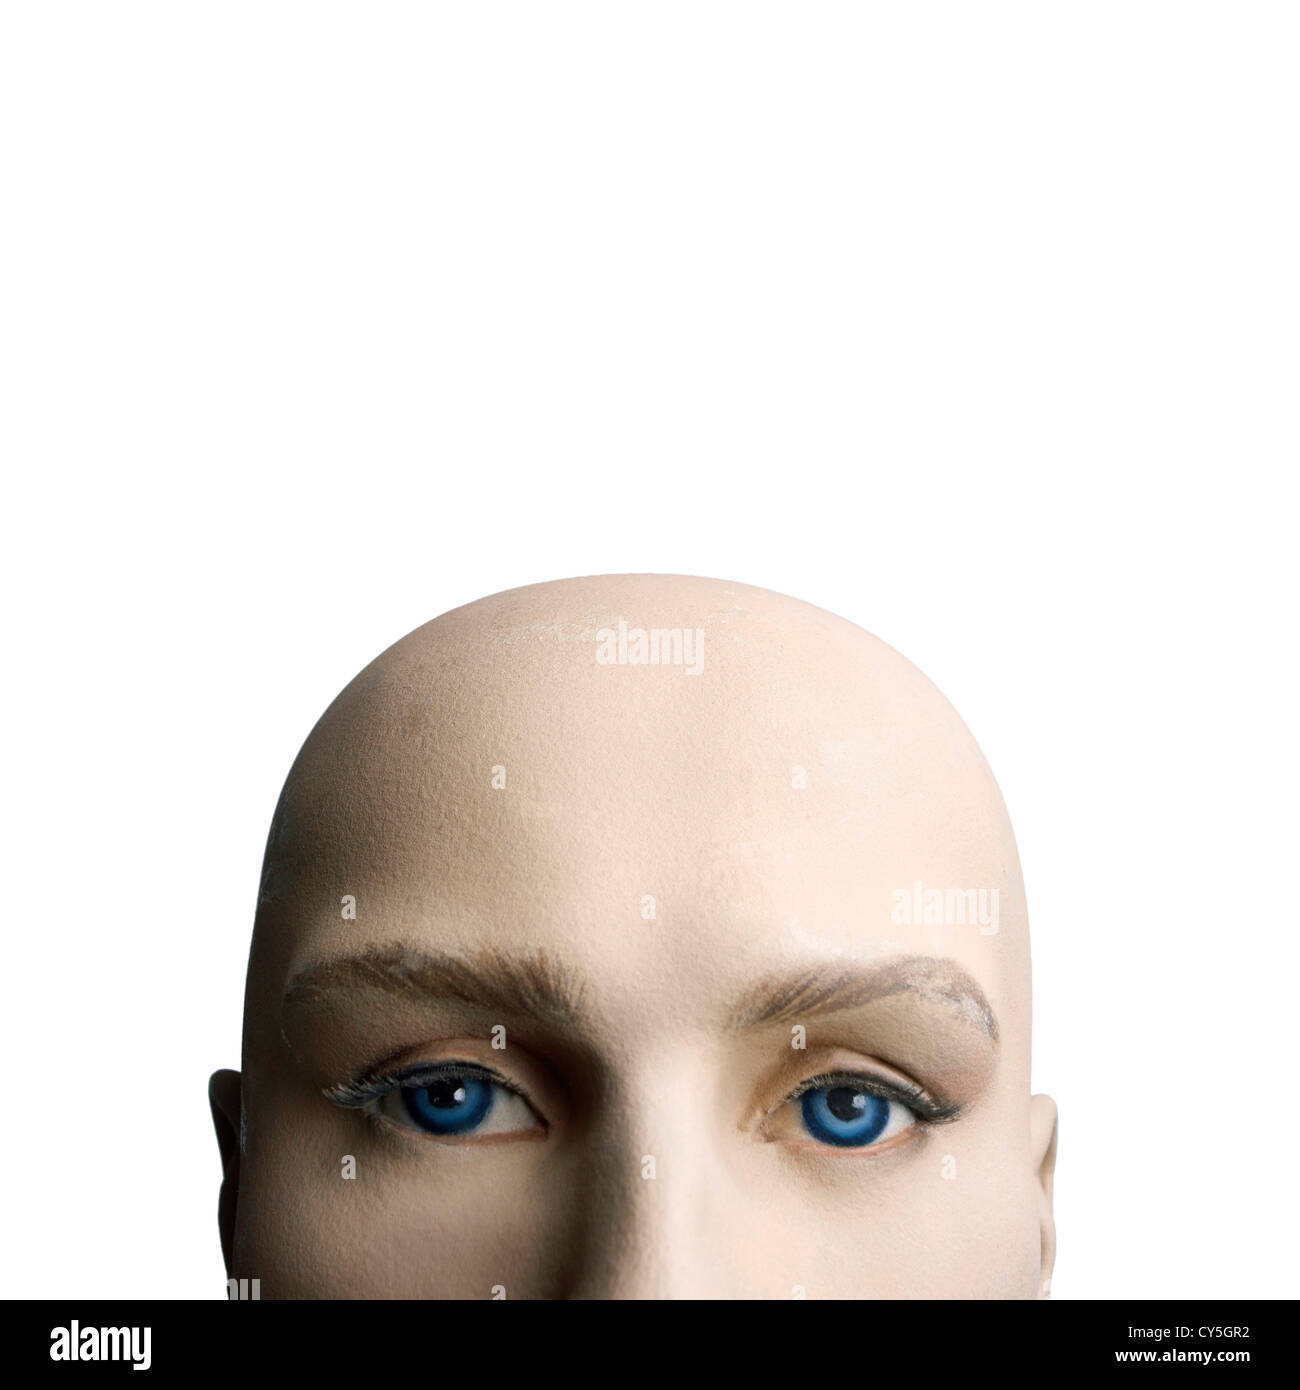 Bald head of a dummy - textured image Stock Photo